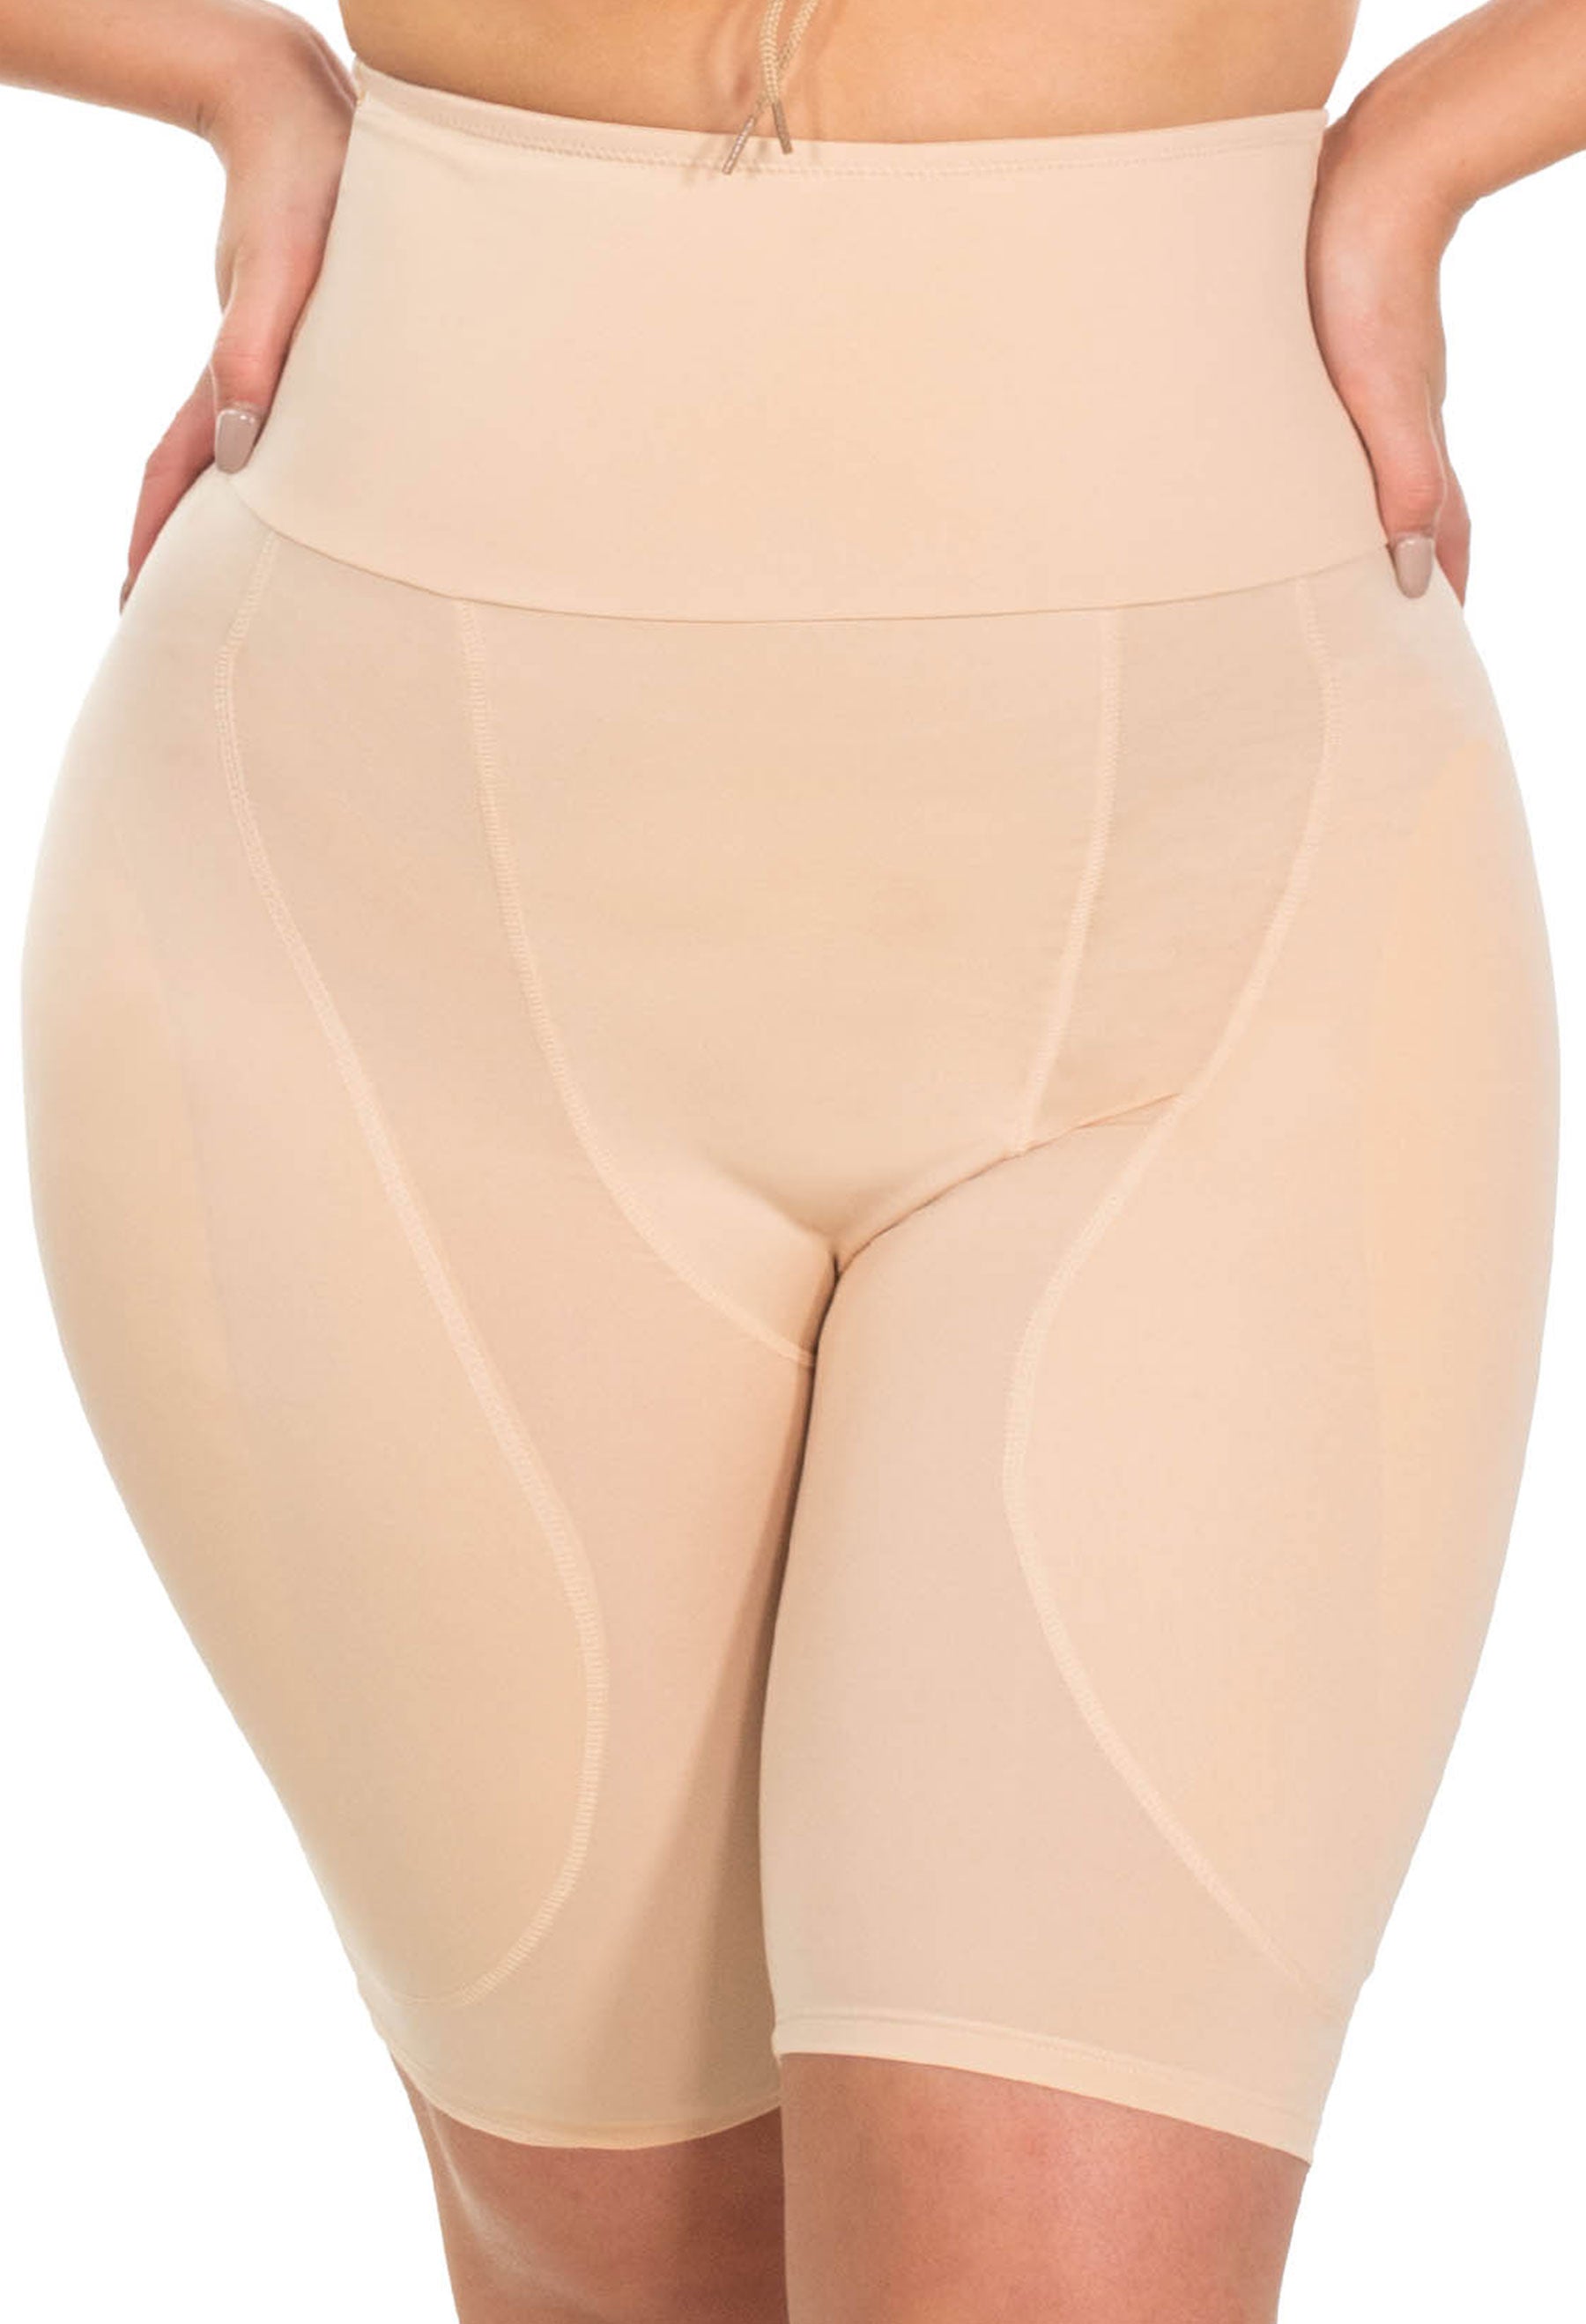 Hey everyone! I get a lot of questions about padding, shapewear